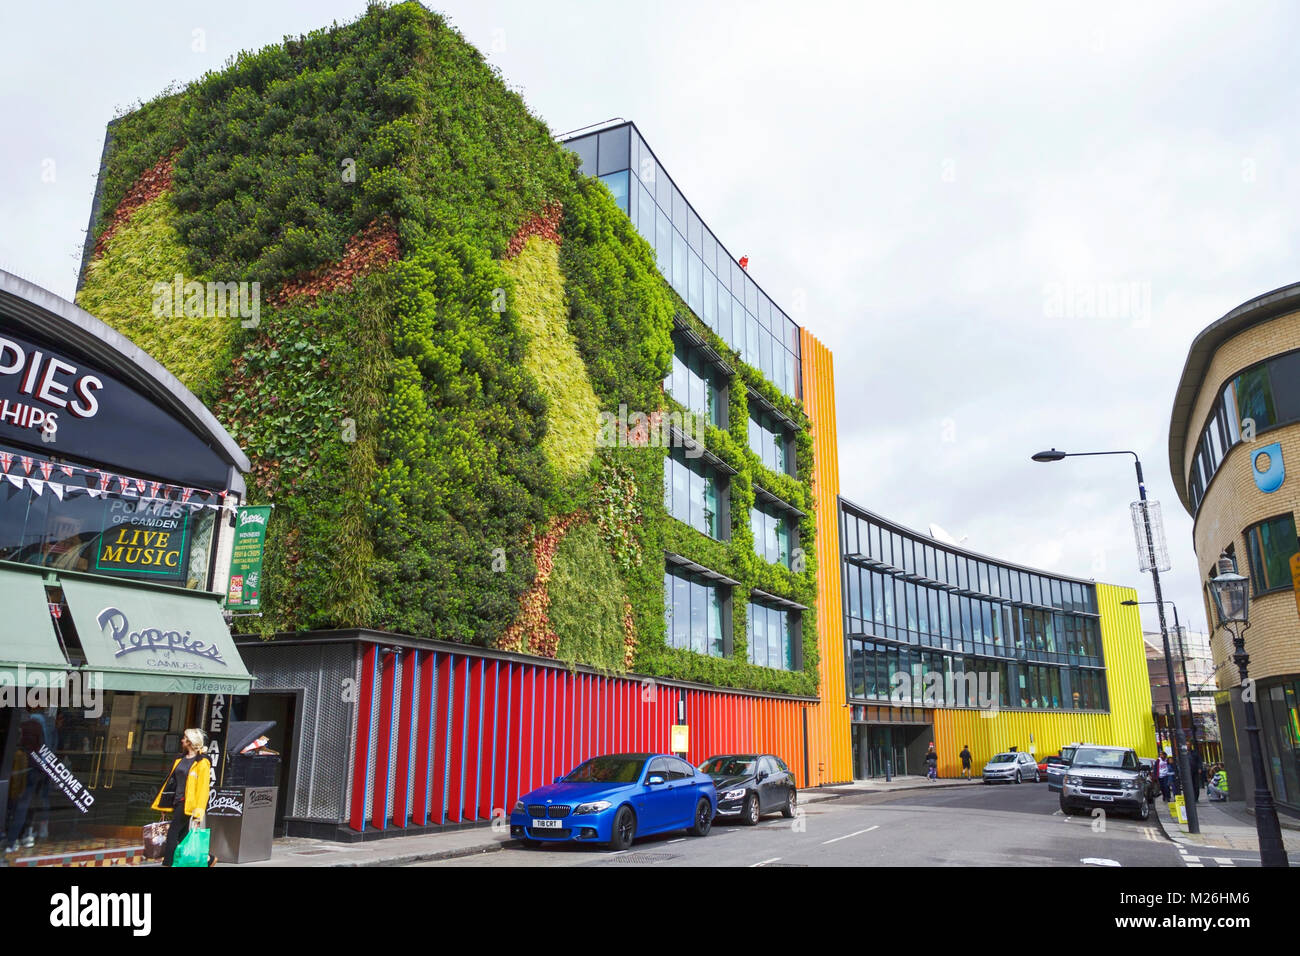 MTV camden. MTV Europe. Building with living wall. London, NW1, UK. Environmental design. Sustainability. Stock Photo